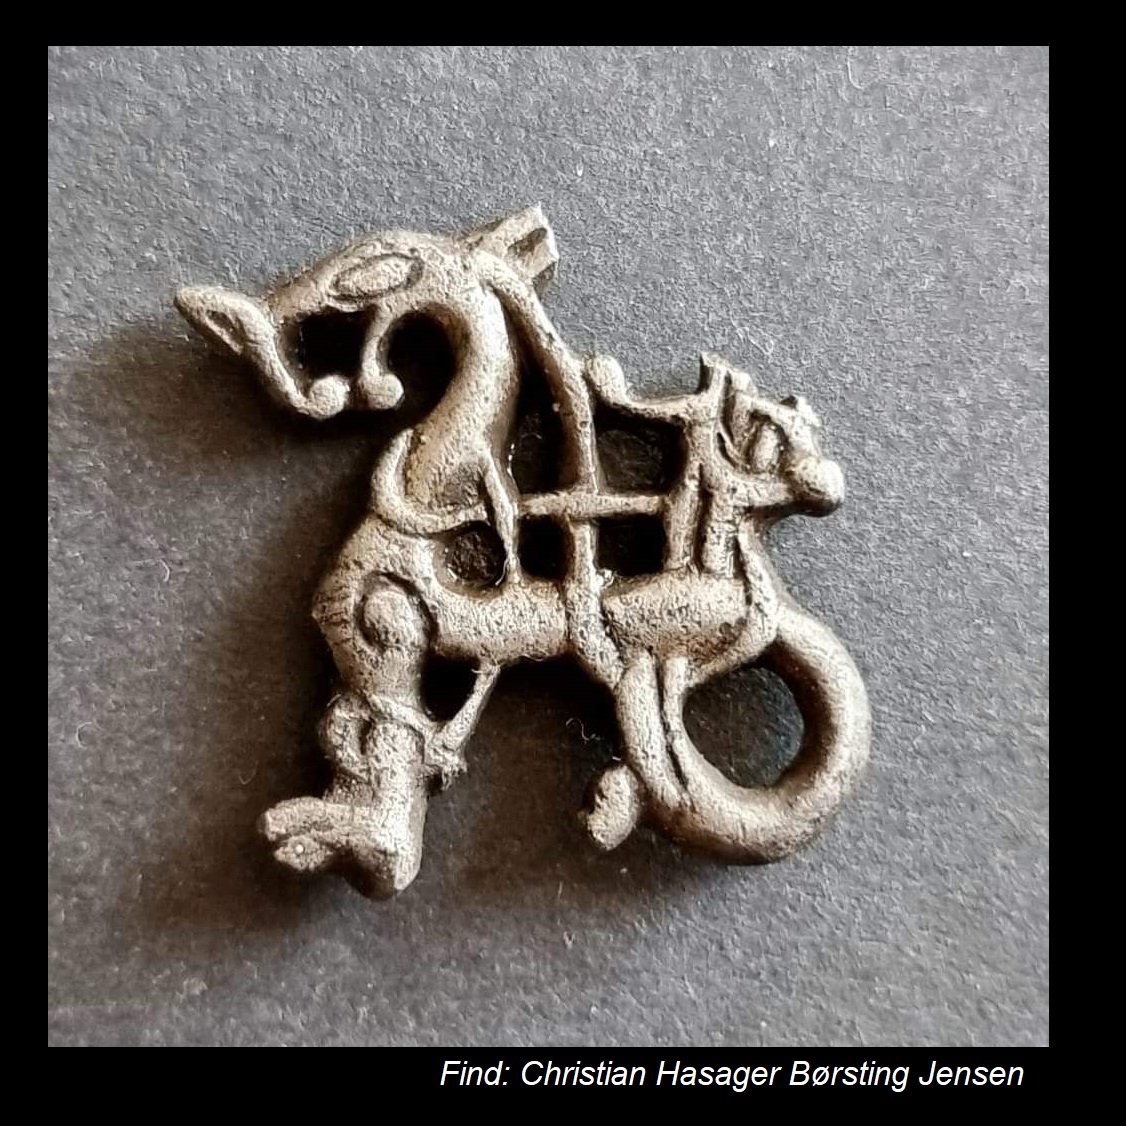 The Urnes style! by some considered the pinnacle of interlacing north European ornaments. The piece was recently found in Denmark by Christian Hasager Børsting Jensen
#nordicanimism #viking #animism #archeology #nordicart